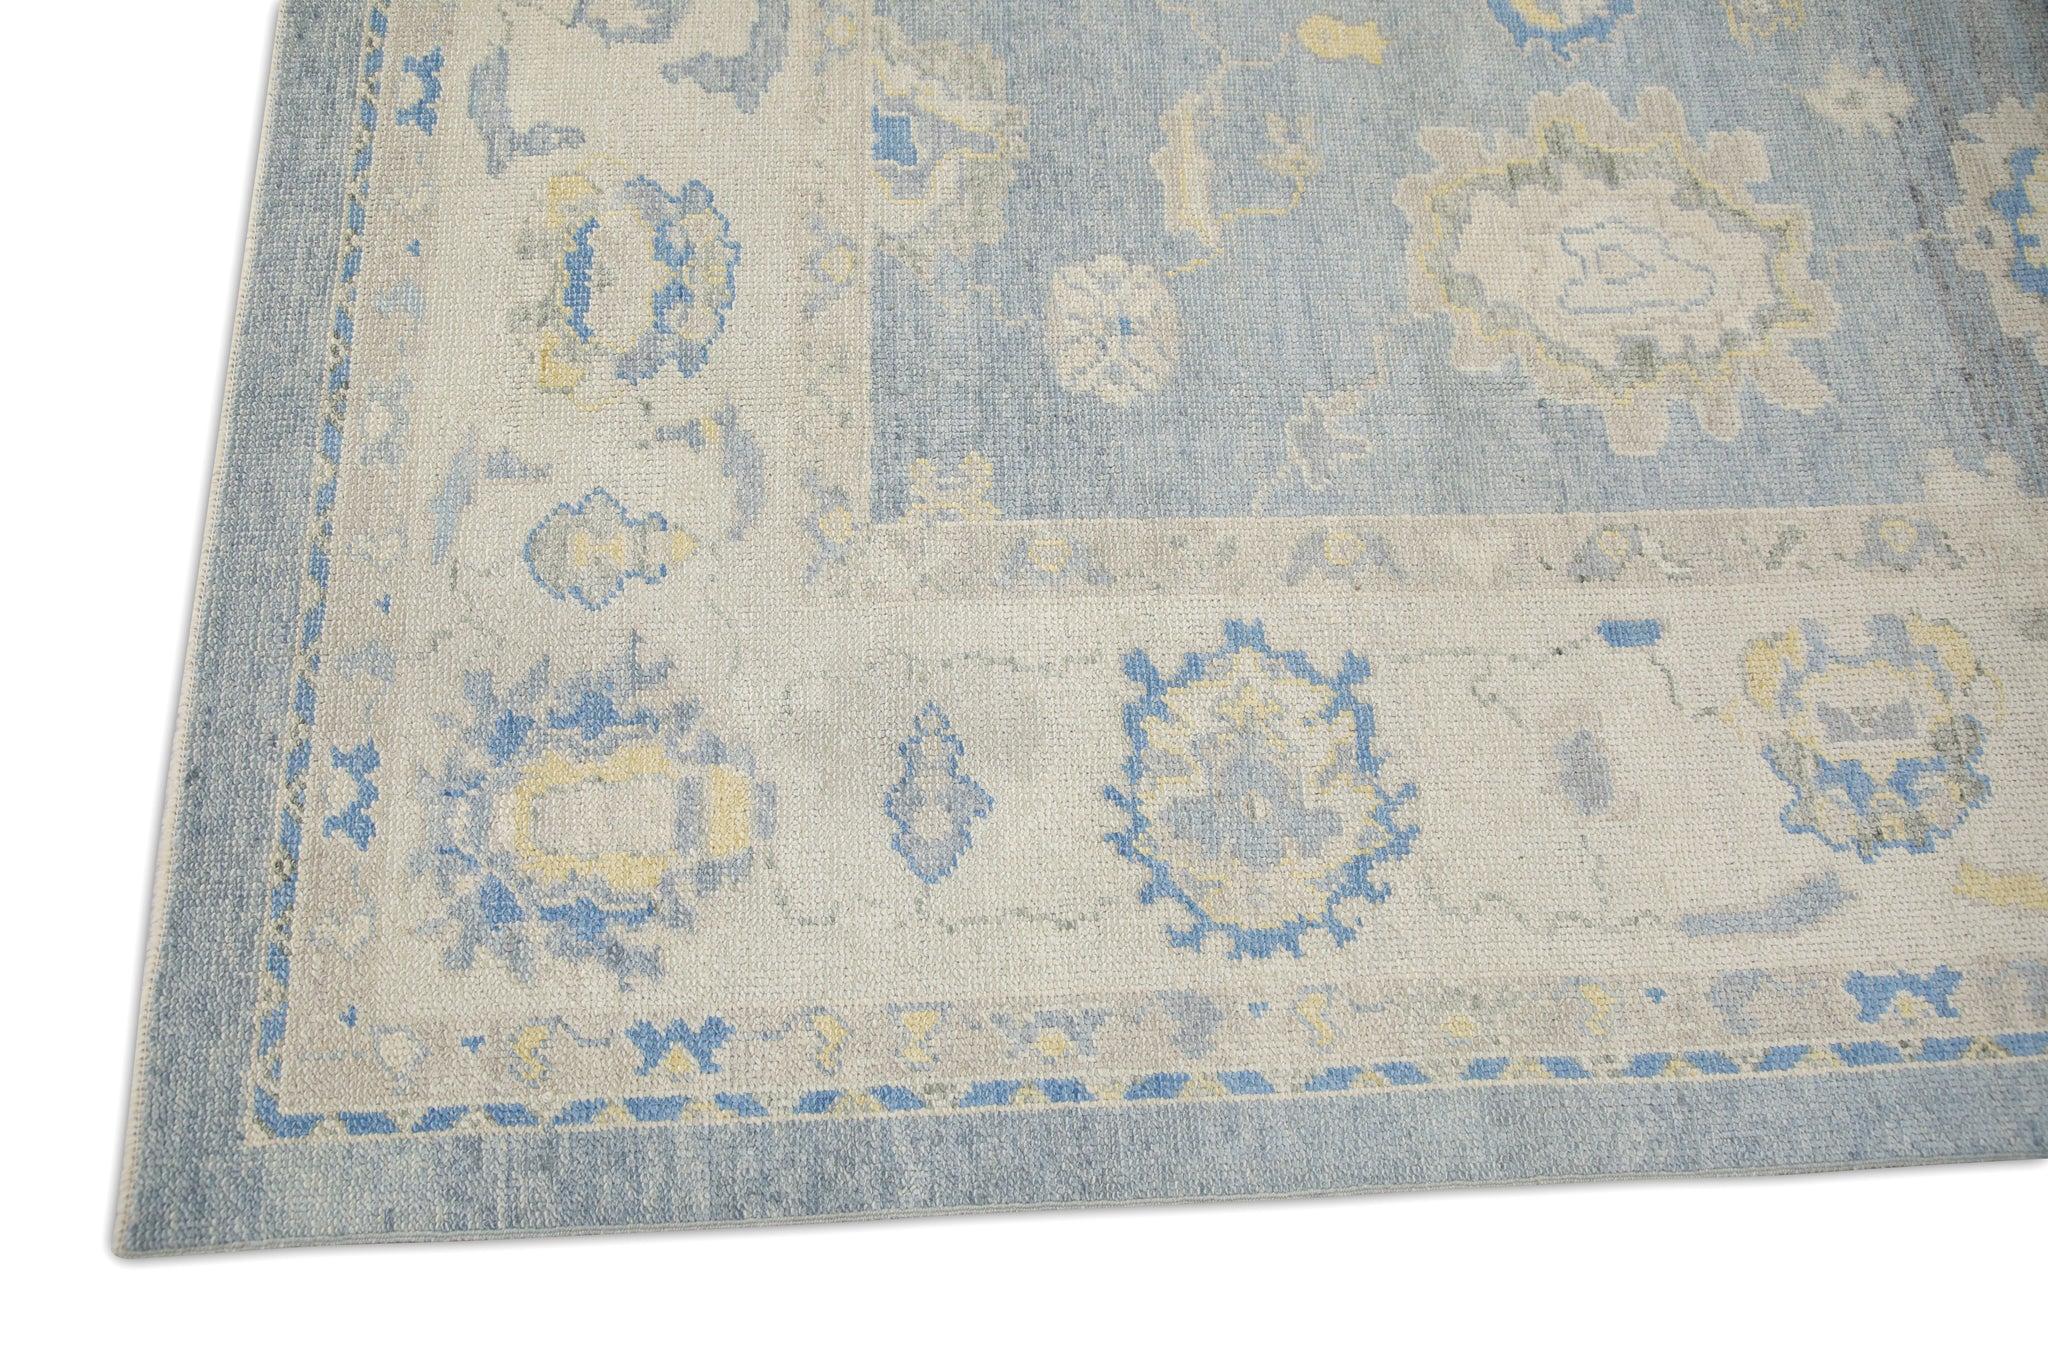 Vegetable Dyed Blue & Yellow Floral Handwoven Wool Turkish Oushak Rug 8' x 9'10